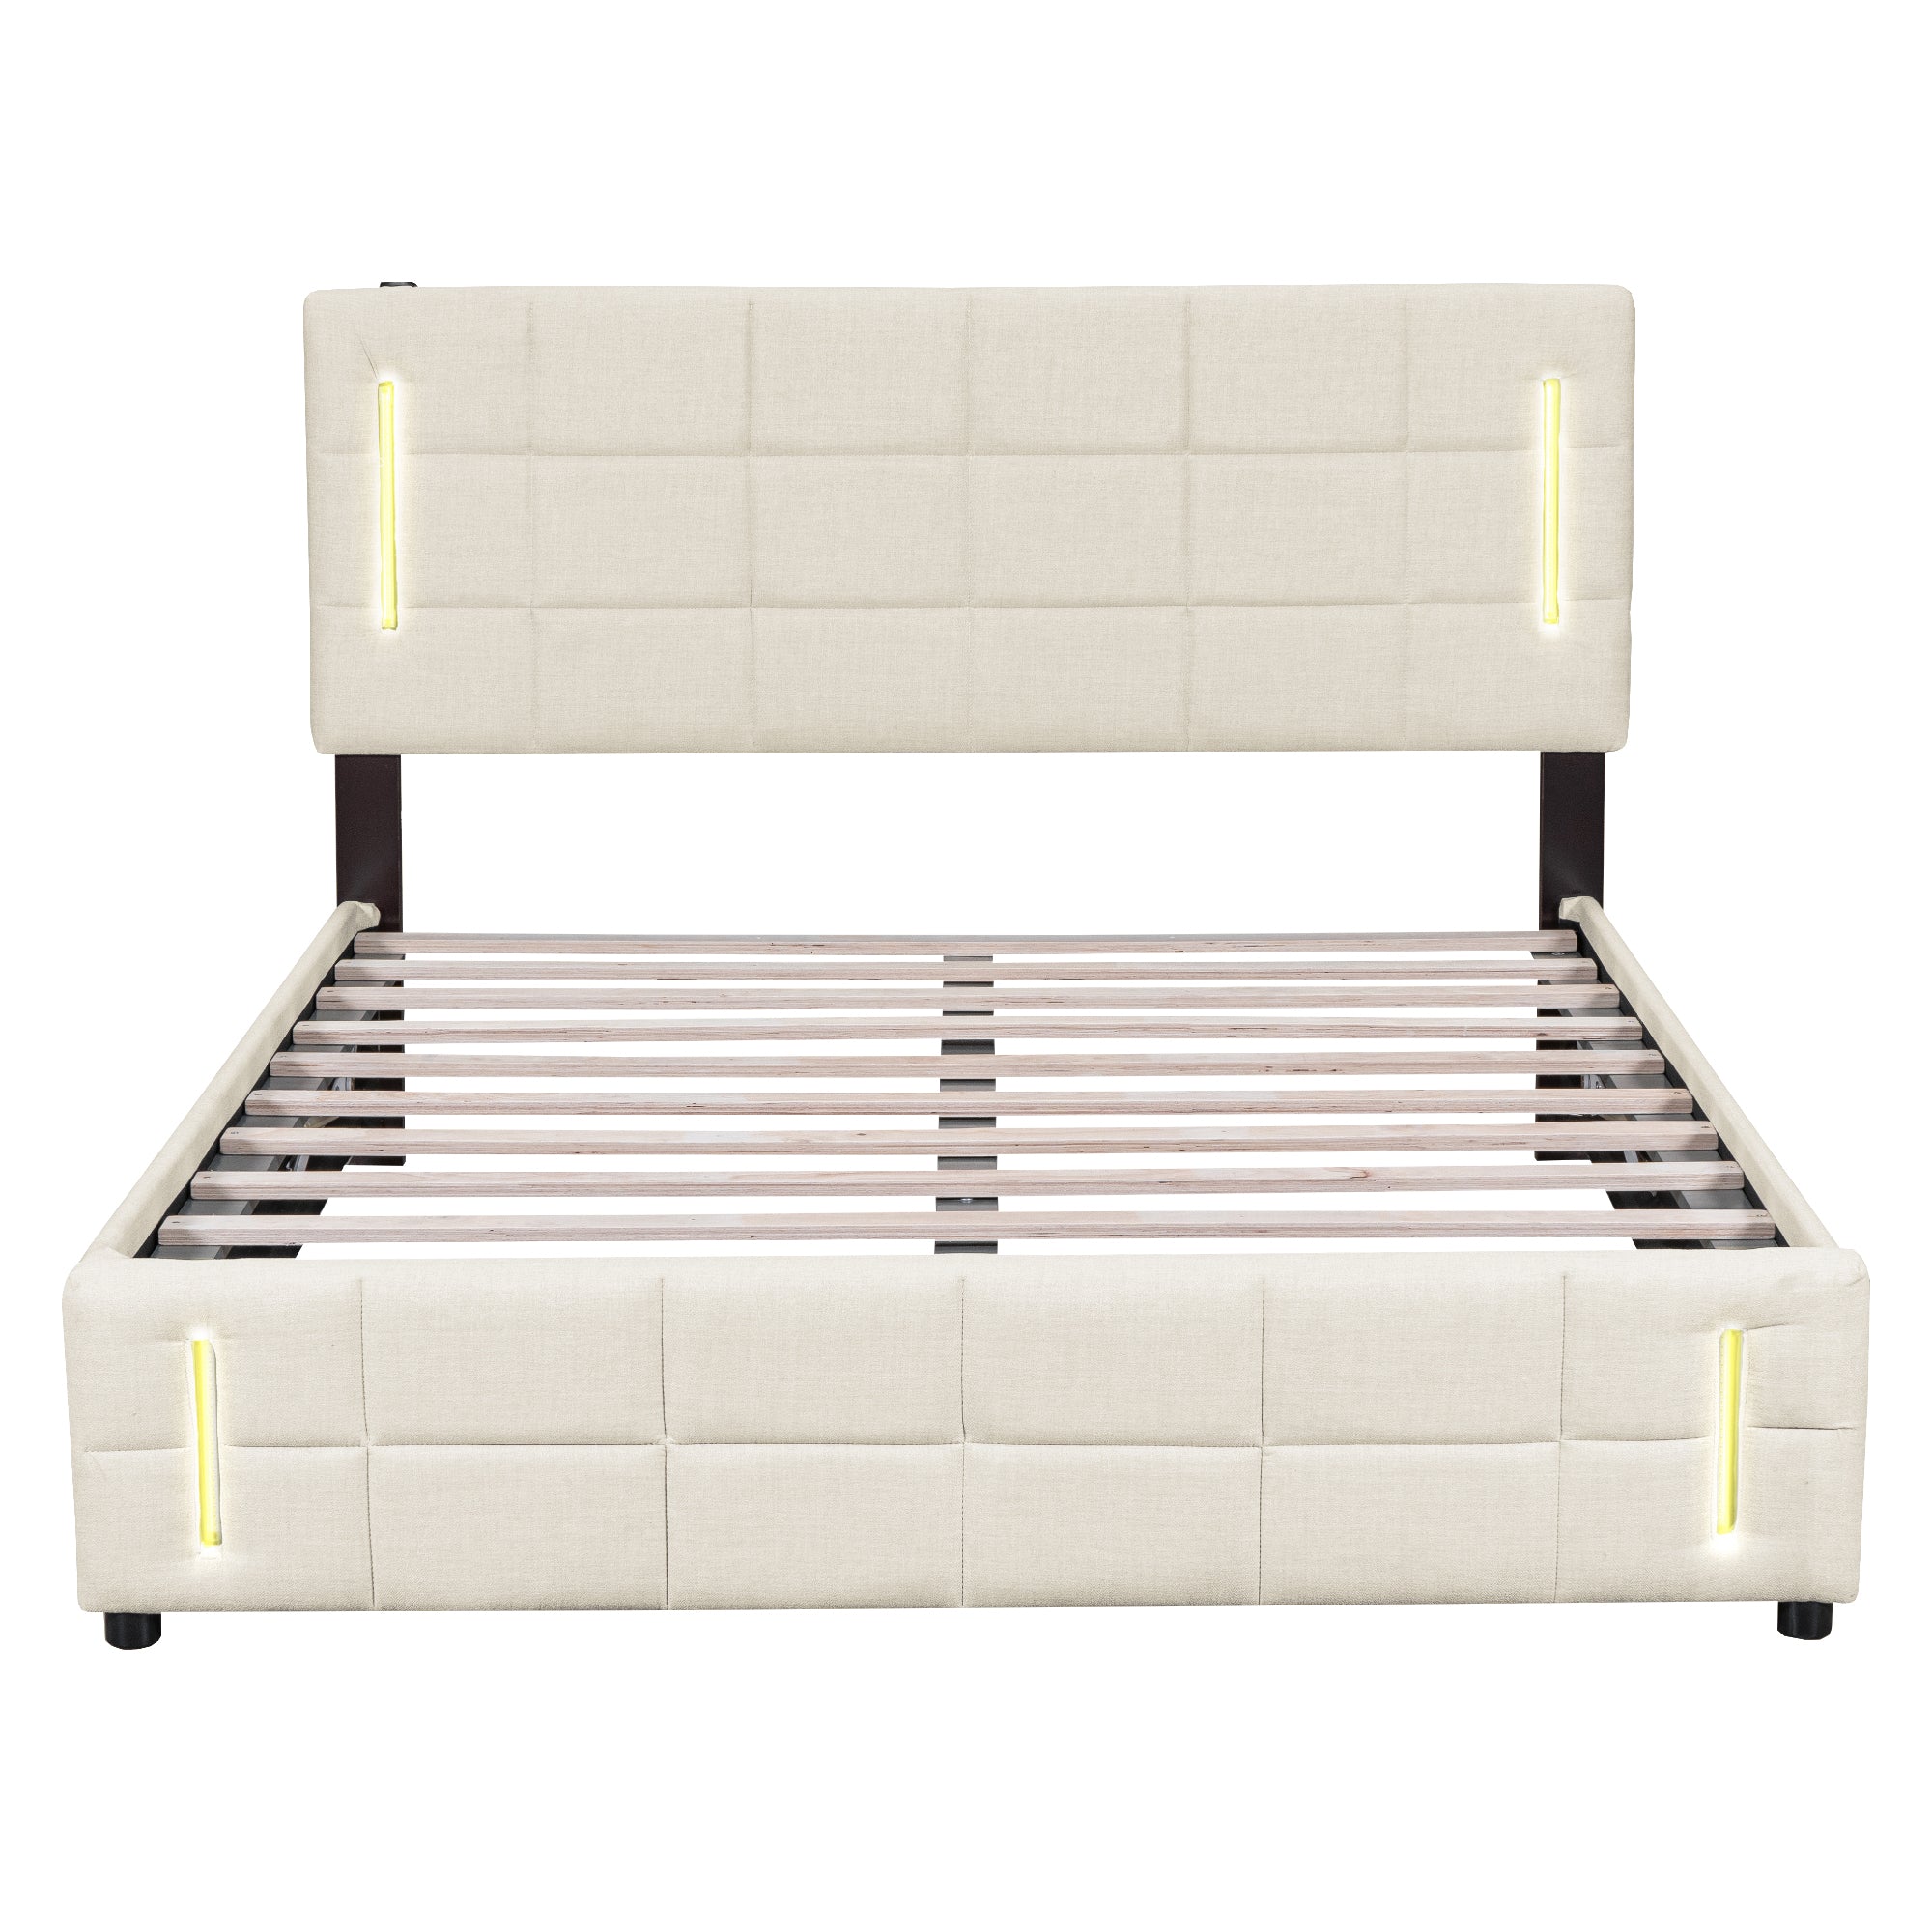 Bellemave® Upholstered Bed with Hydraulic Storage System and LED Light Bellemave®